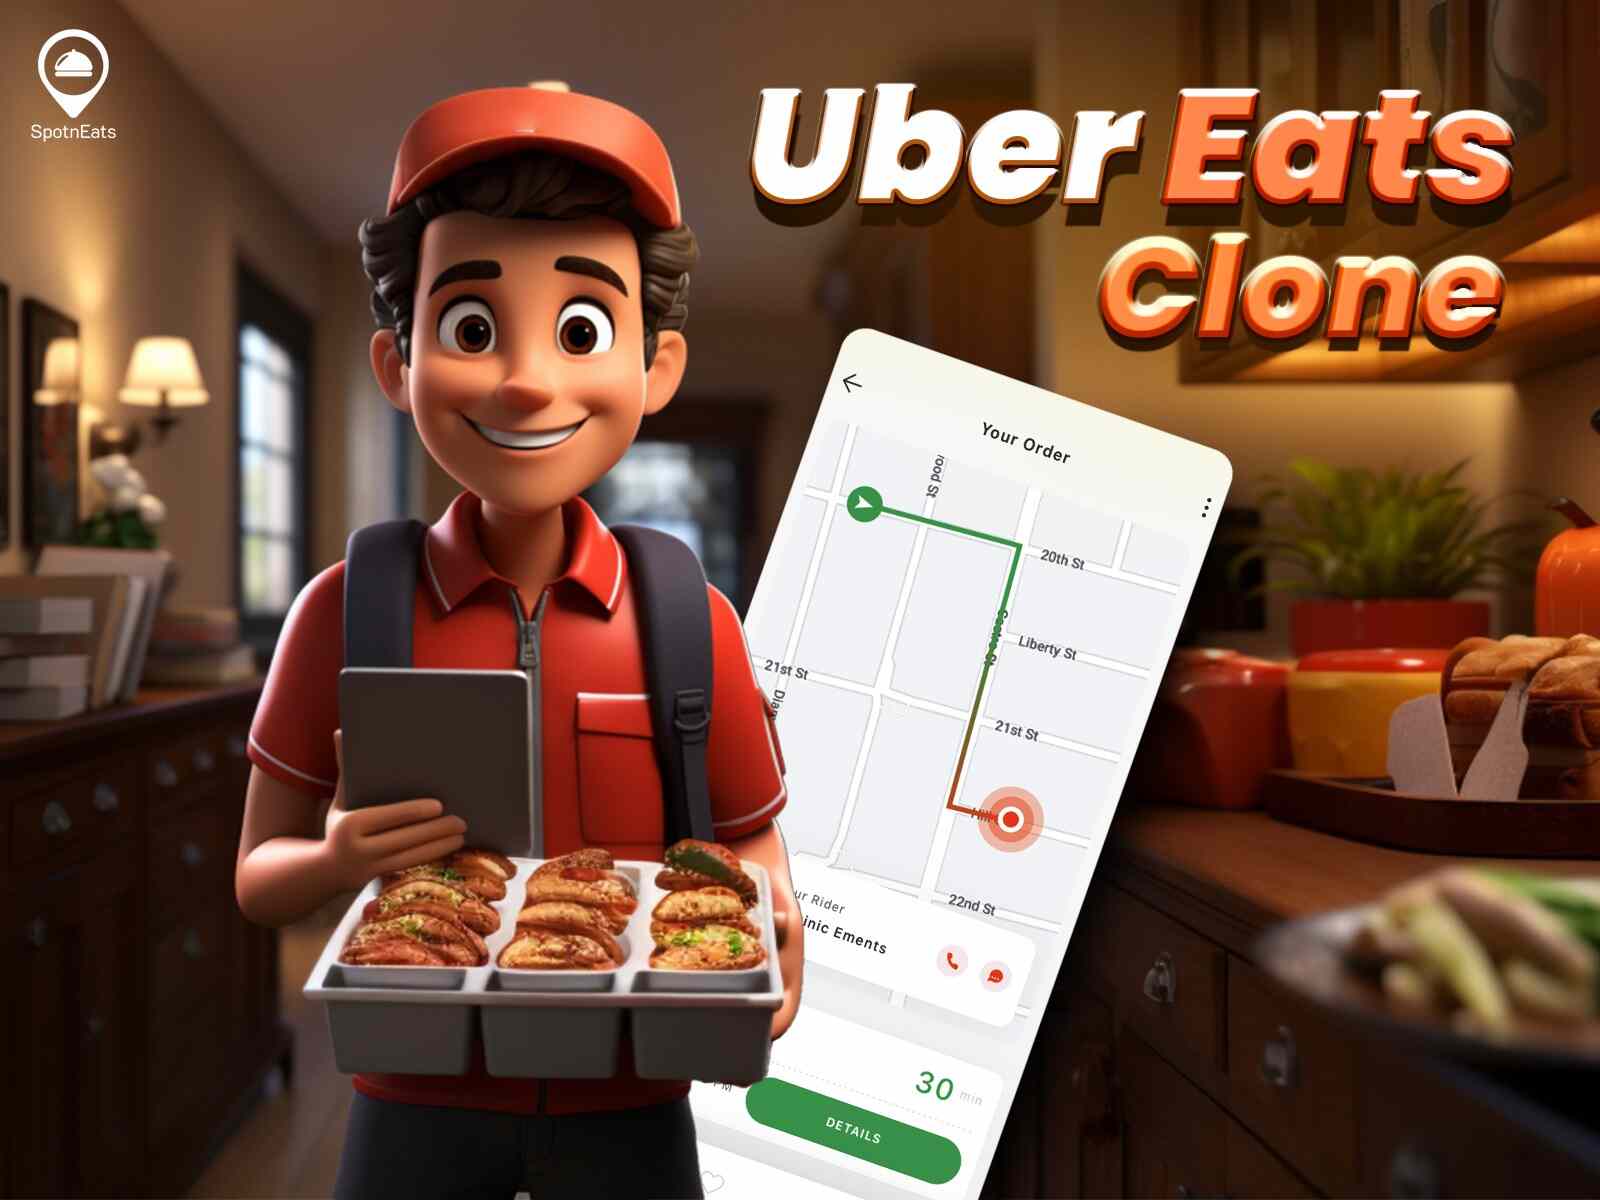  UberEats clone app has the potential to completely transform your business